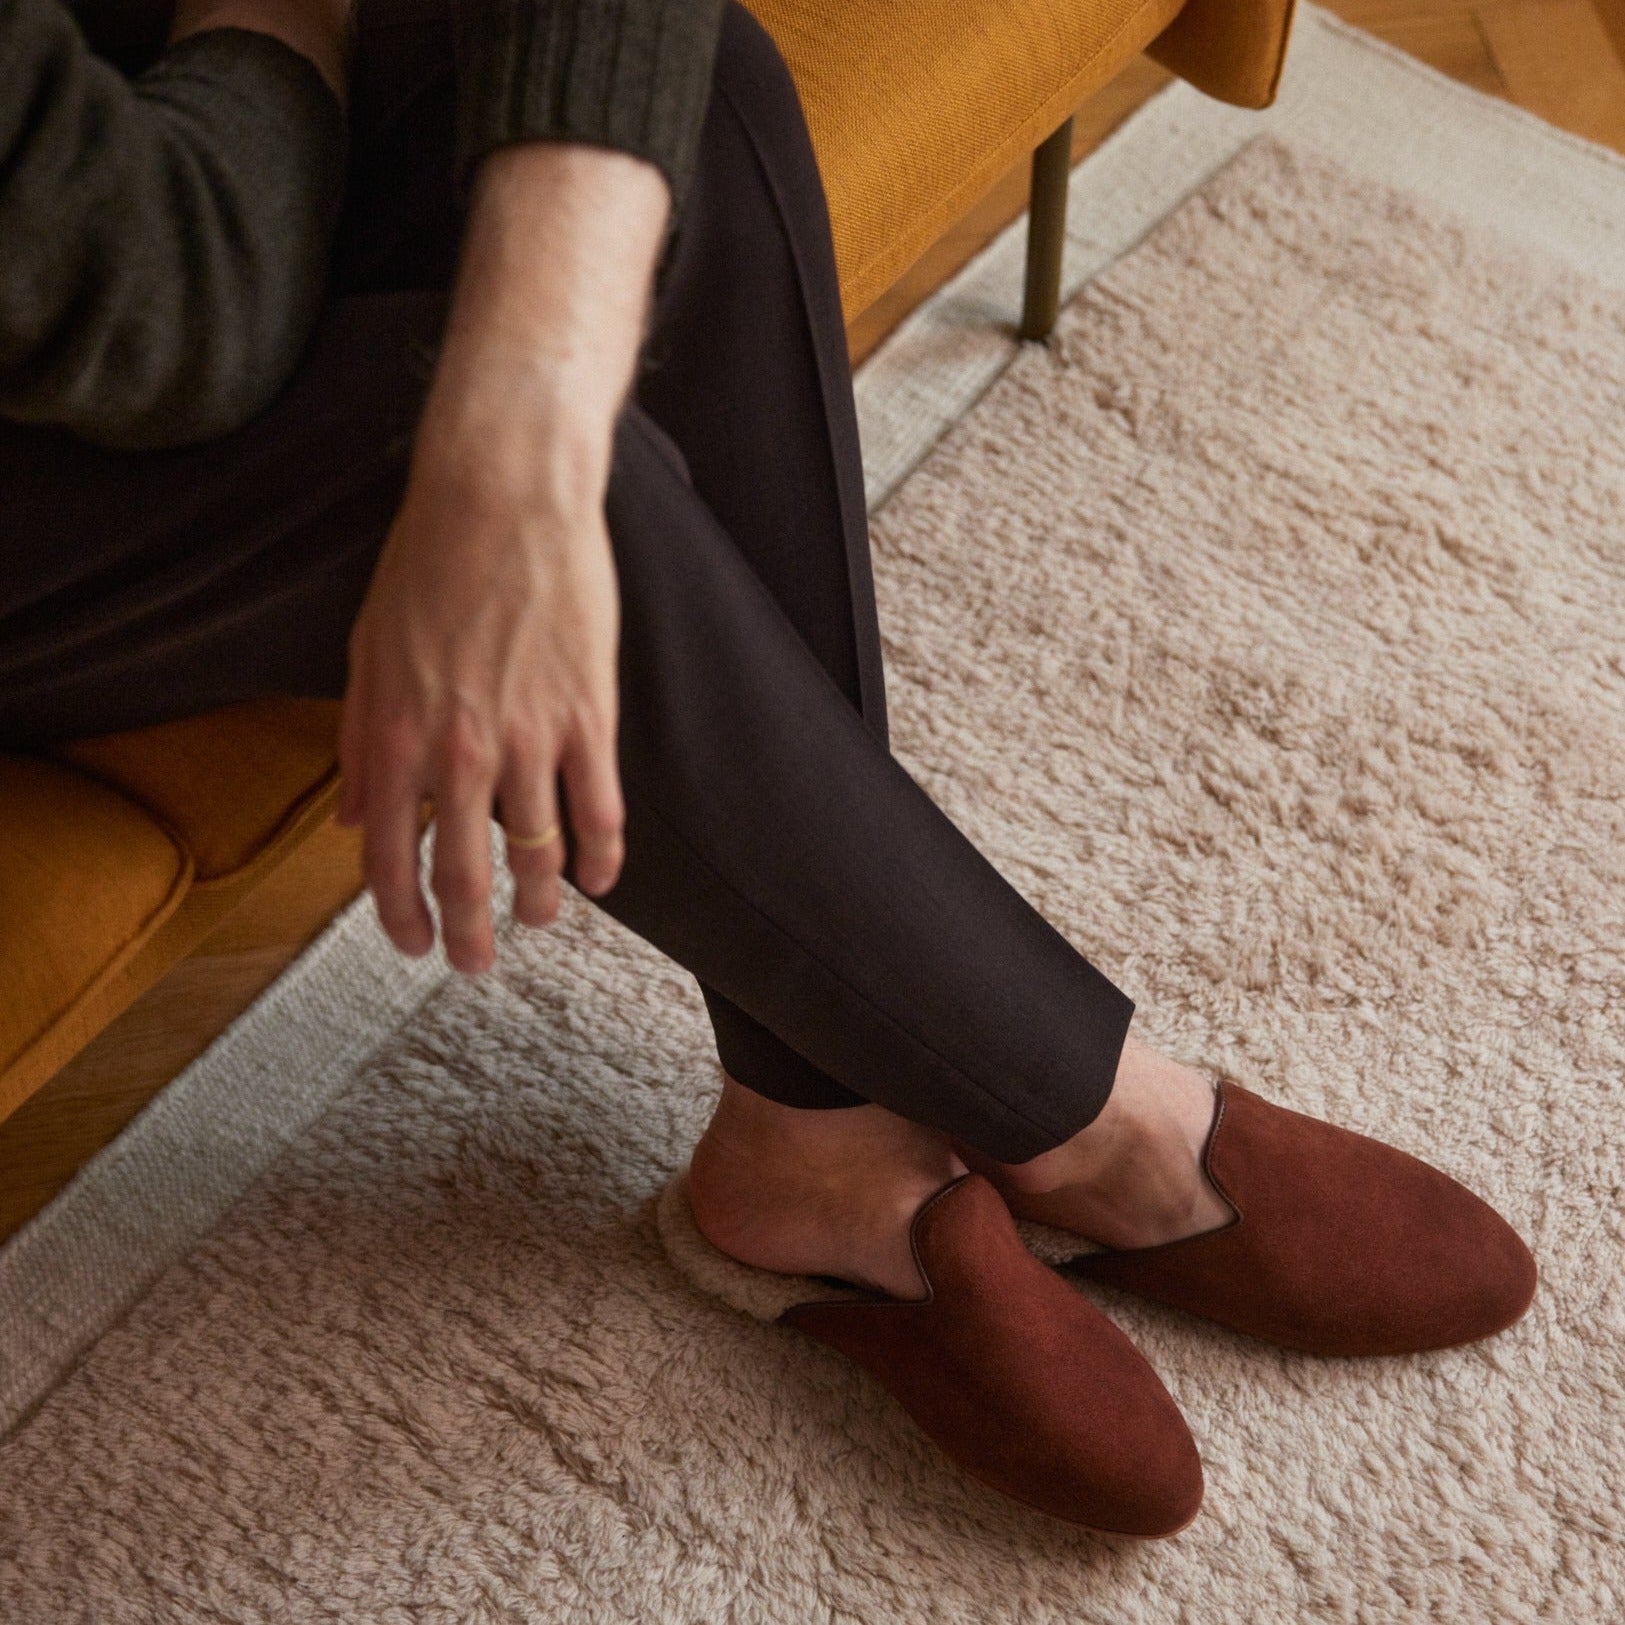 Inabo Men's Fritz Slipper in tobacco suede and white shearling worn by a man sitting on a couch